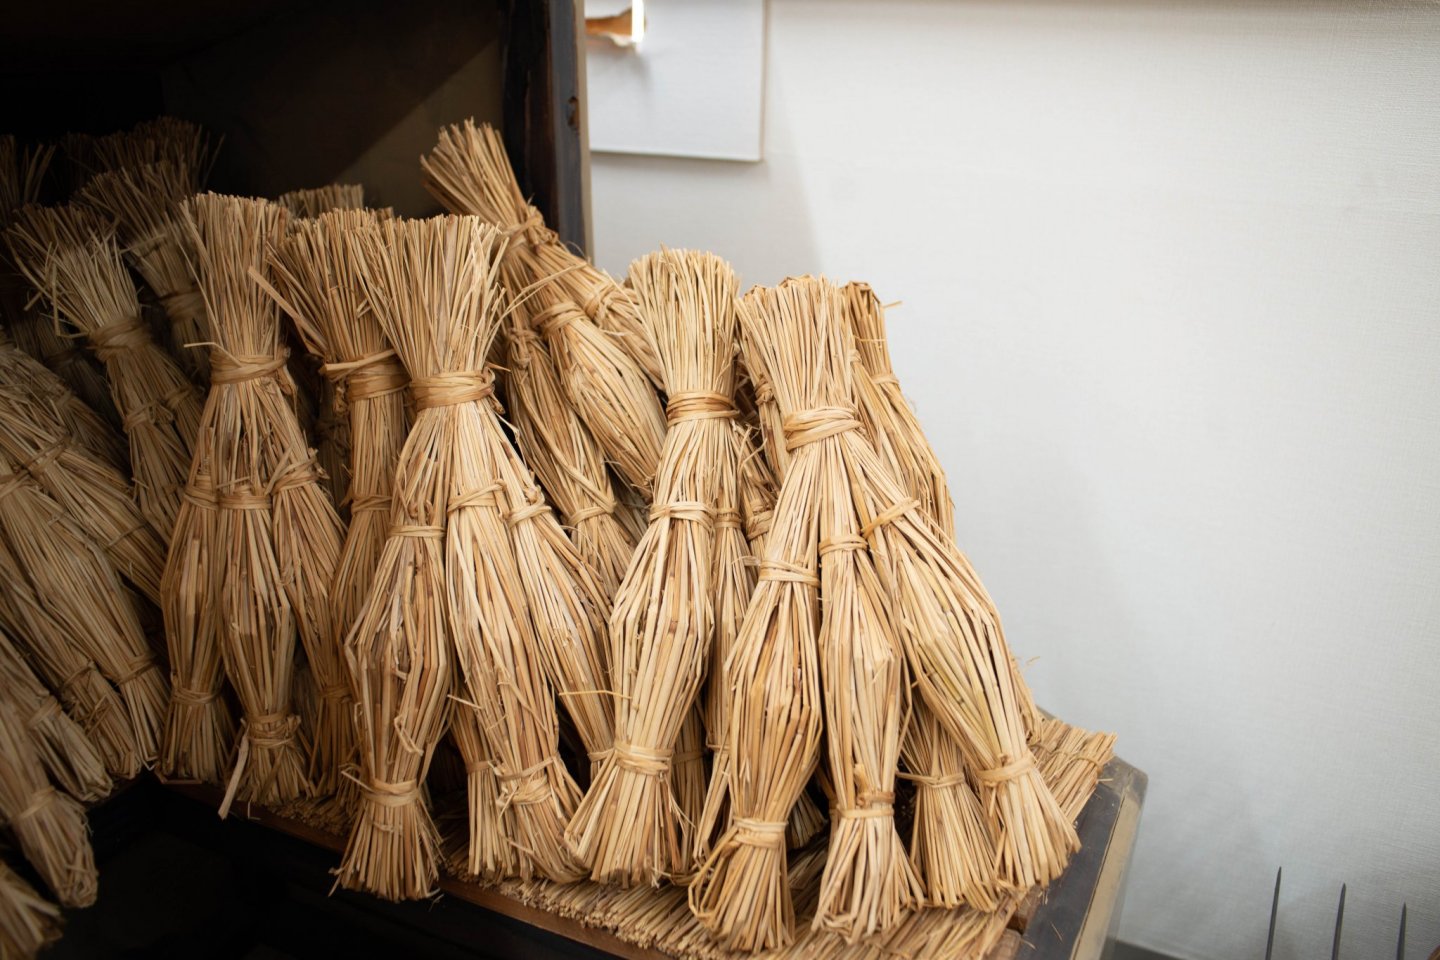 Straw used for wrapping natto